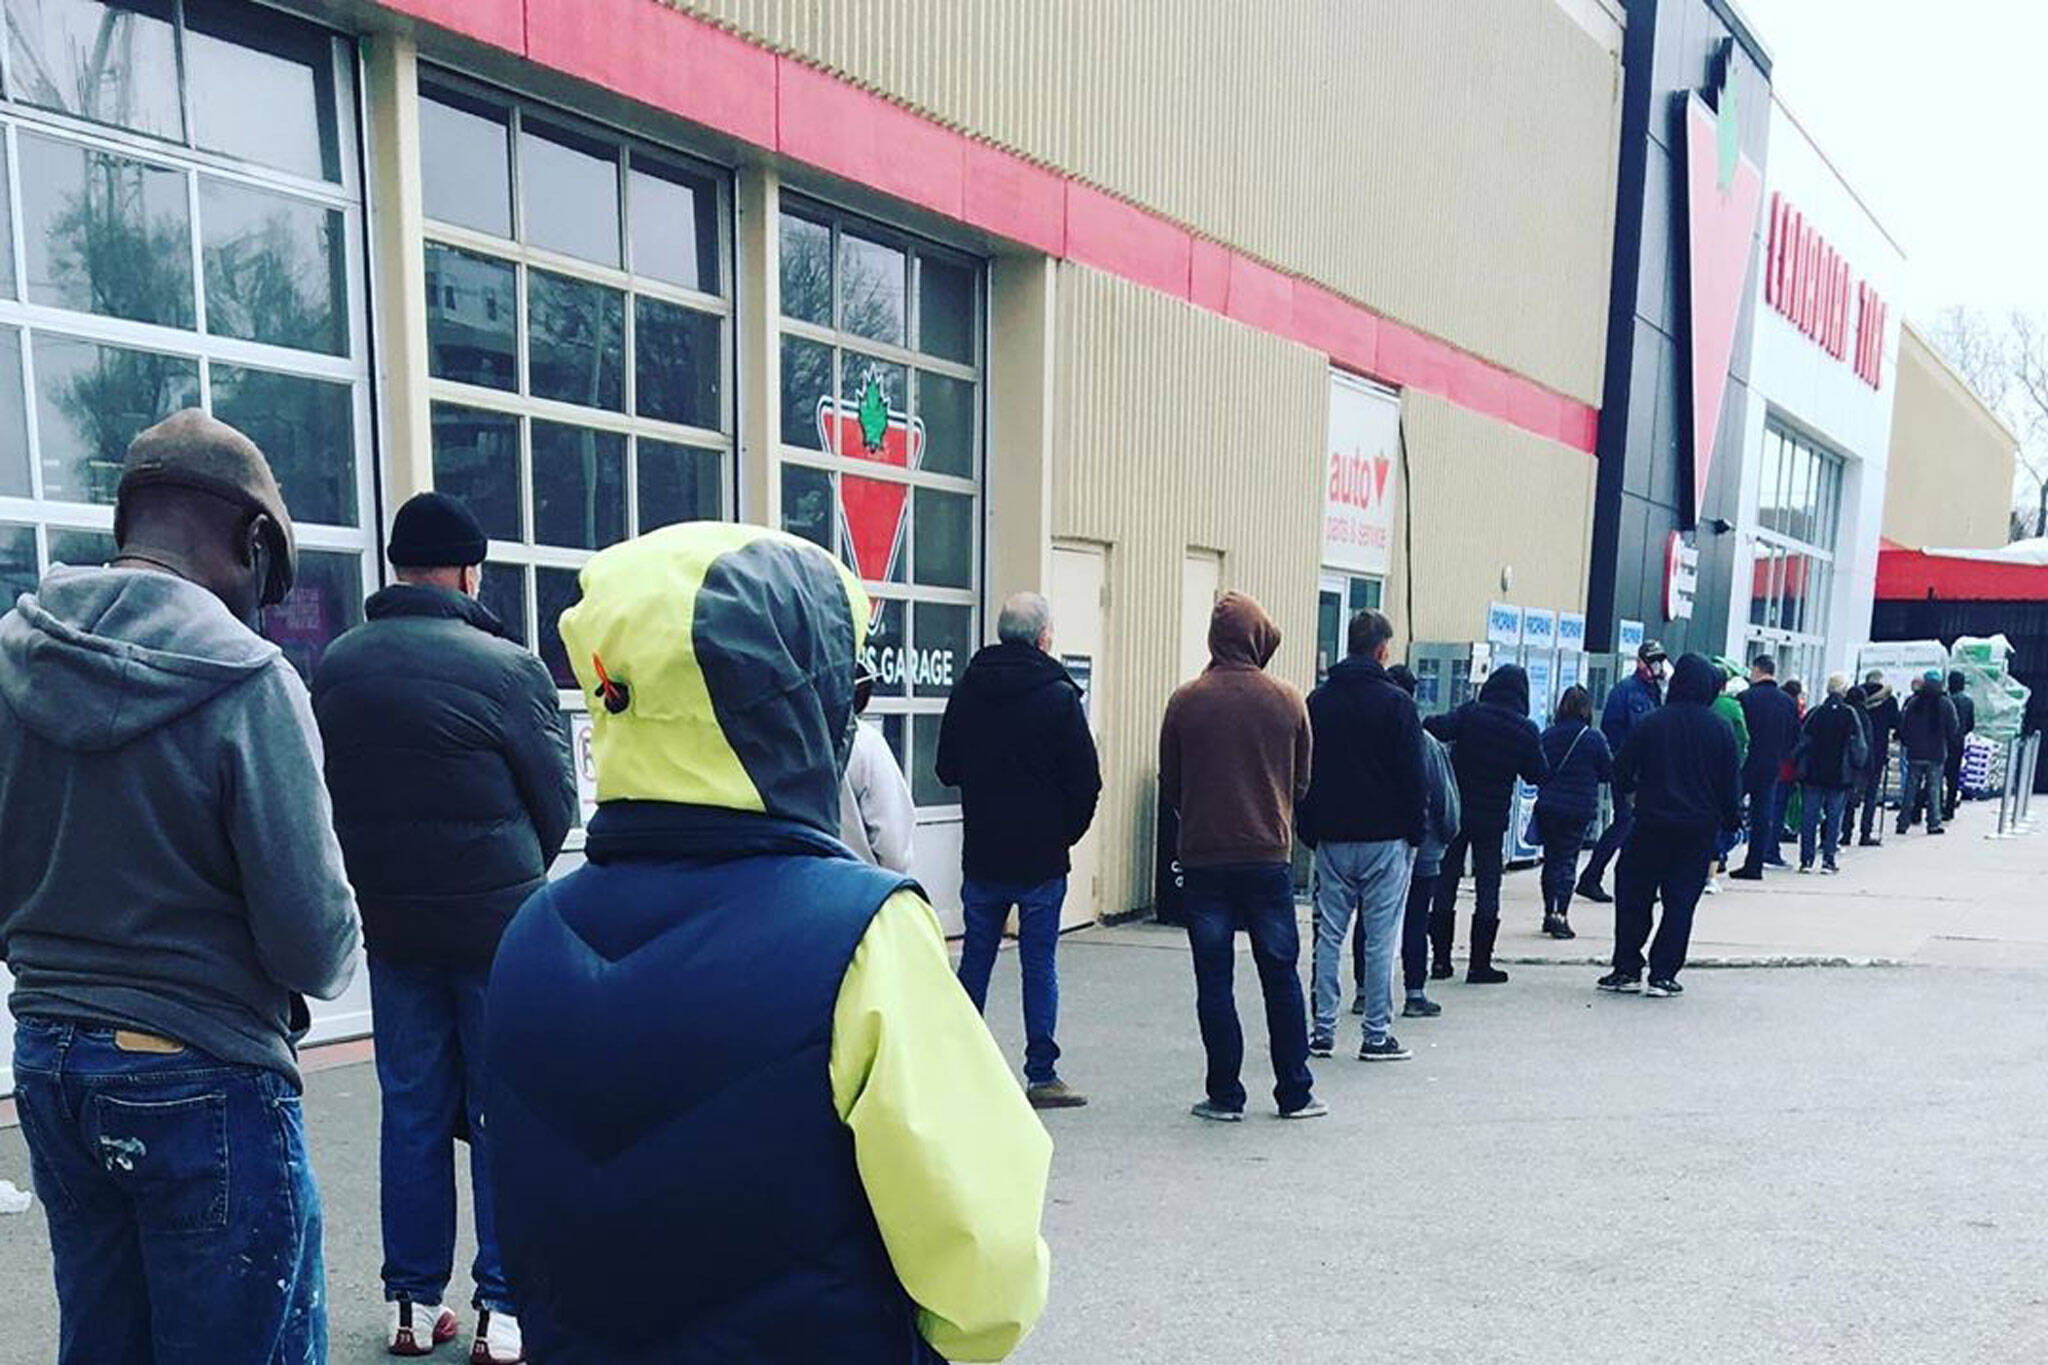 Canadian Tire is closing all stores and now their web site has too much